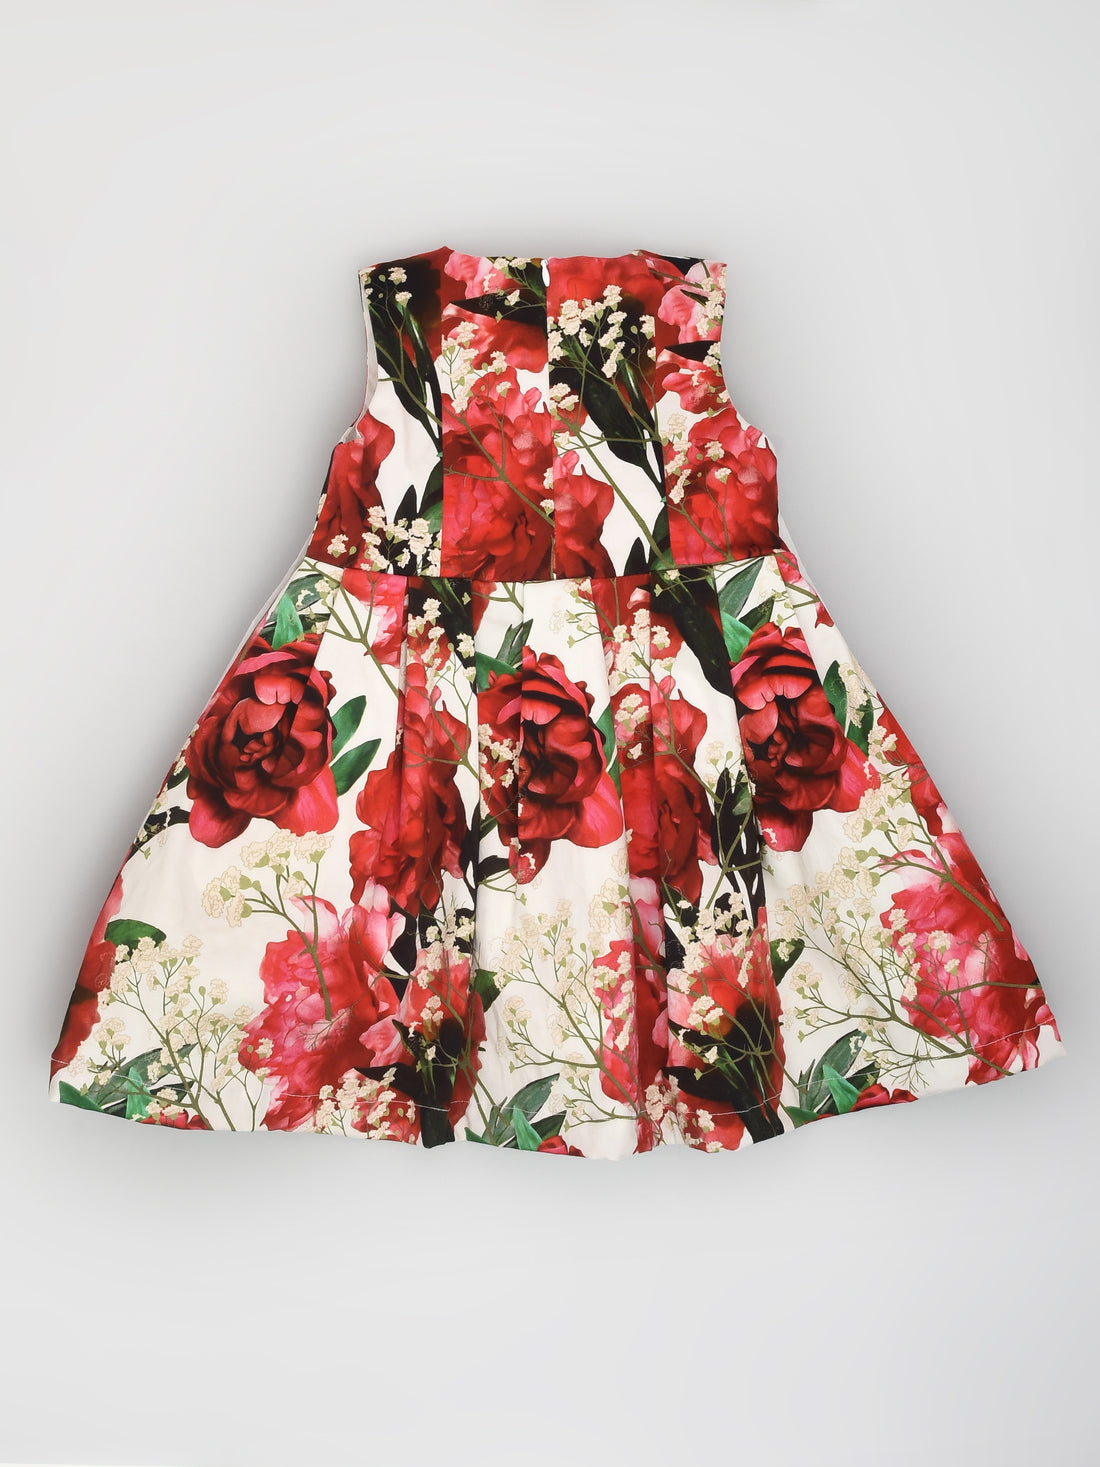 Red Floral Party Dress with Black Bow